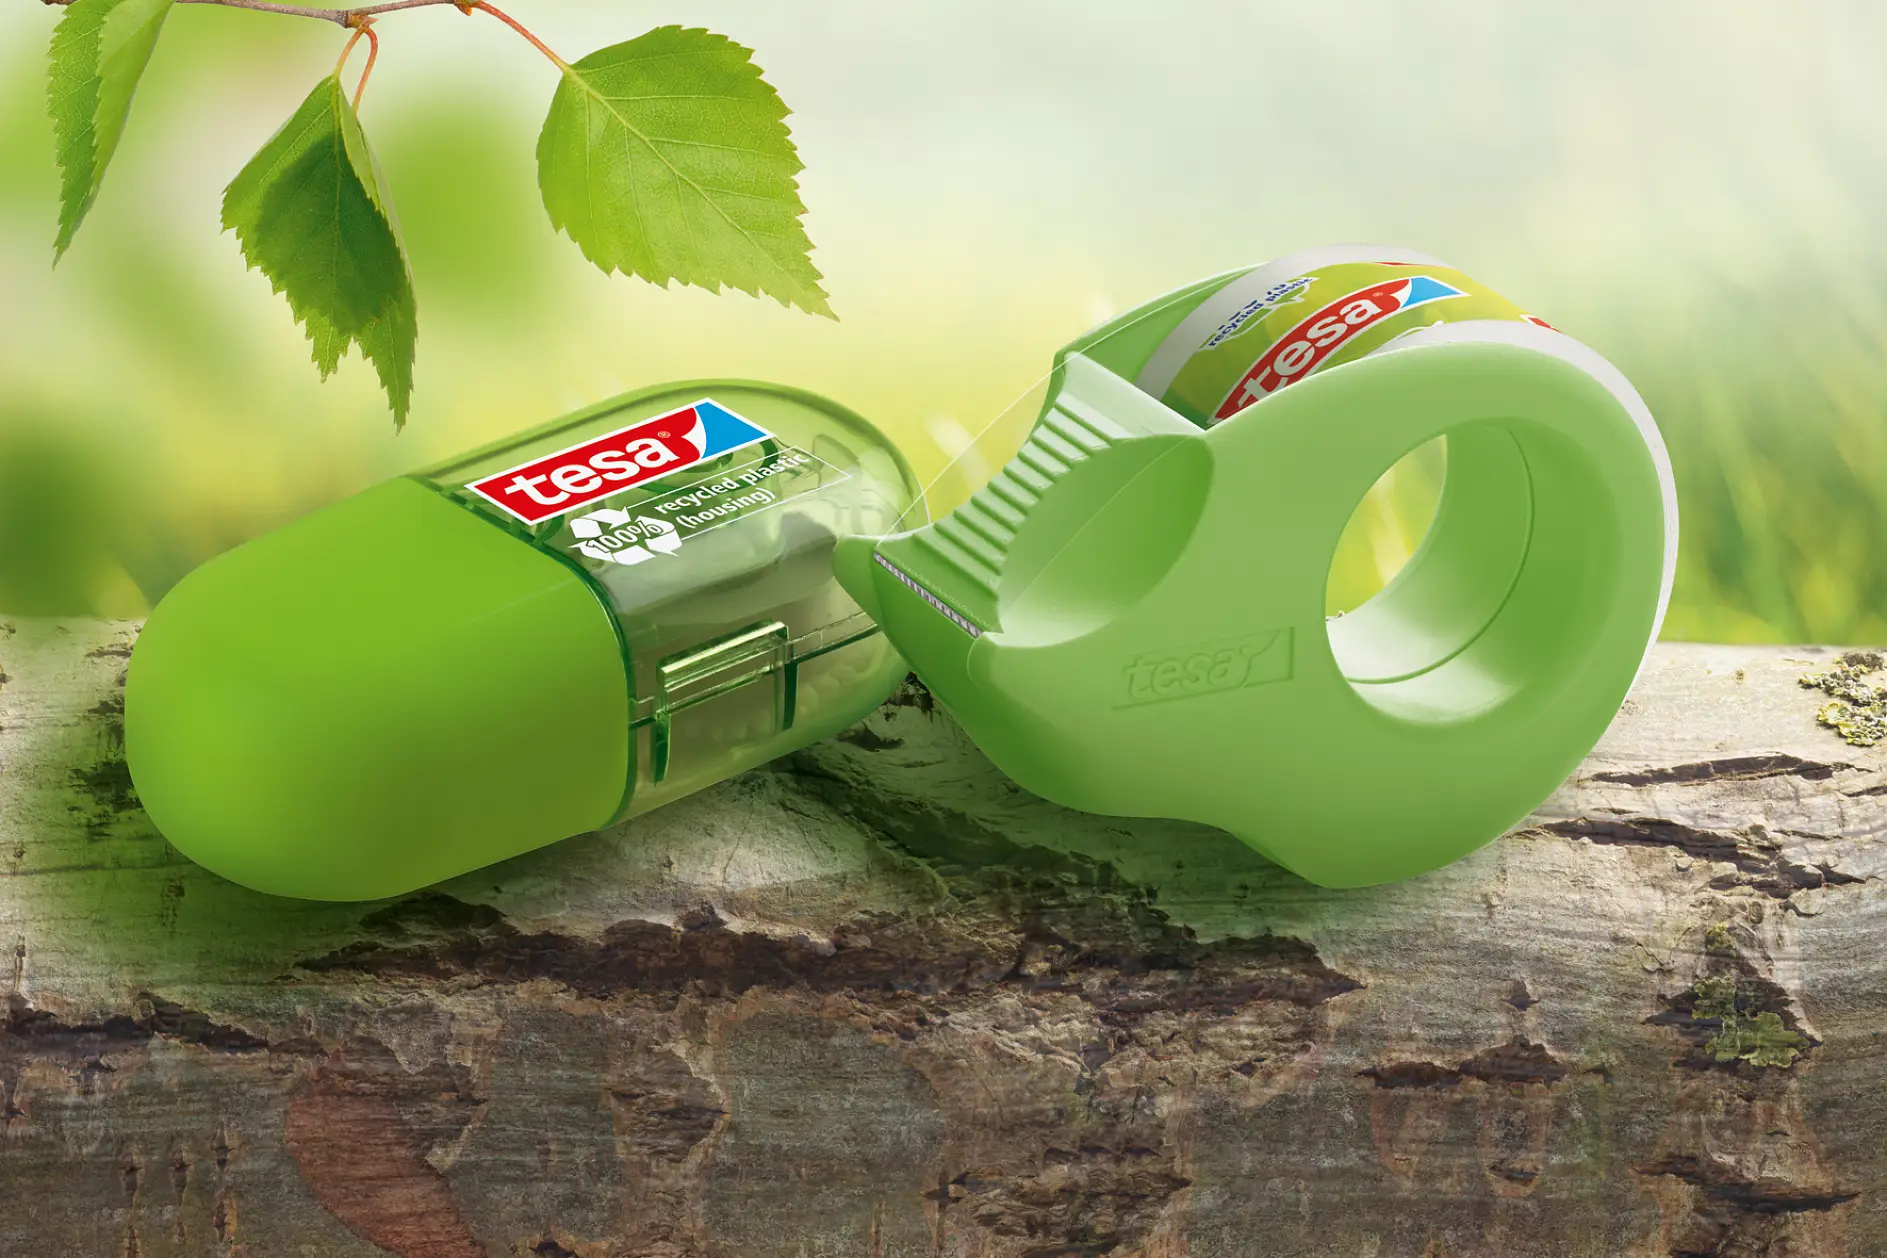 Great helpers and good for the environment: the award-winning products tesafilm® Mini Dispenser ecoLogo® and tesa Mini Roller Correction ecoLogo®.